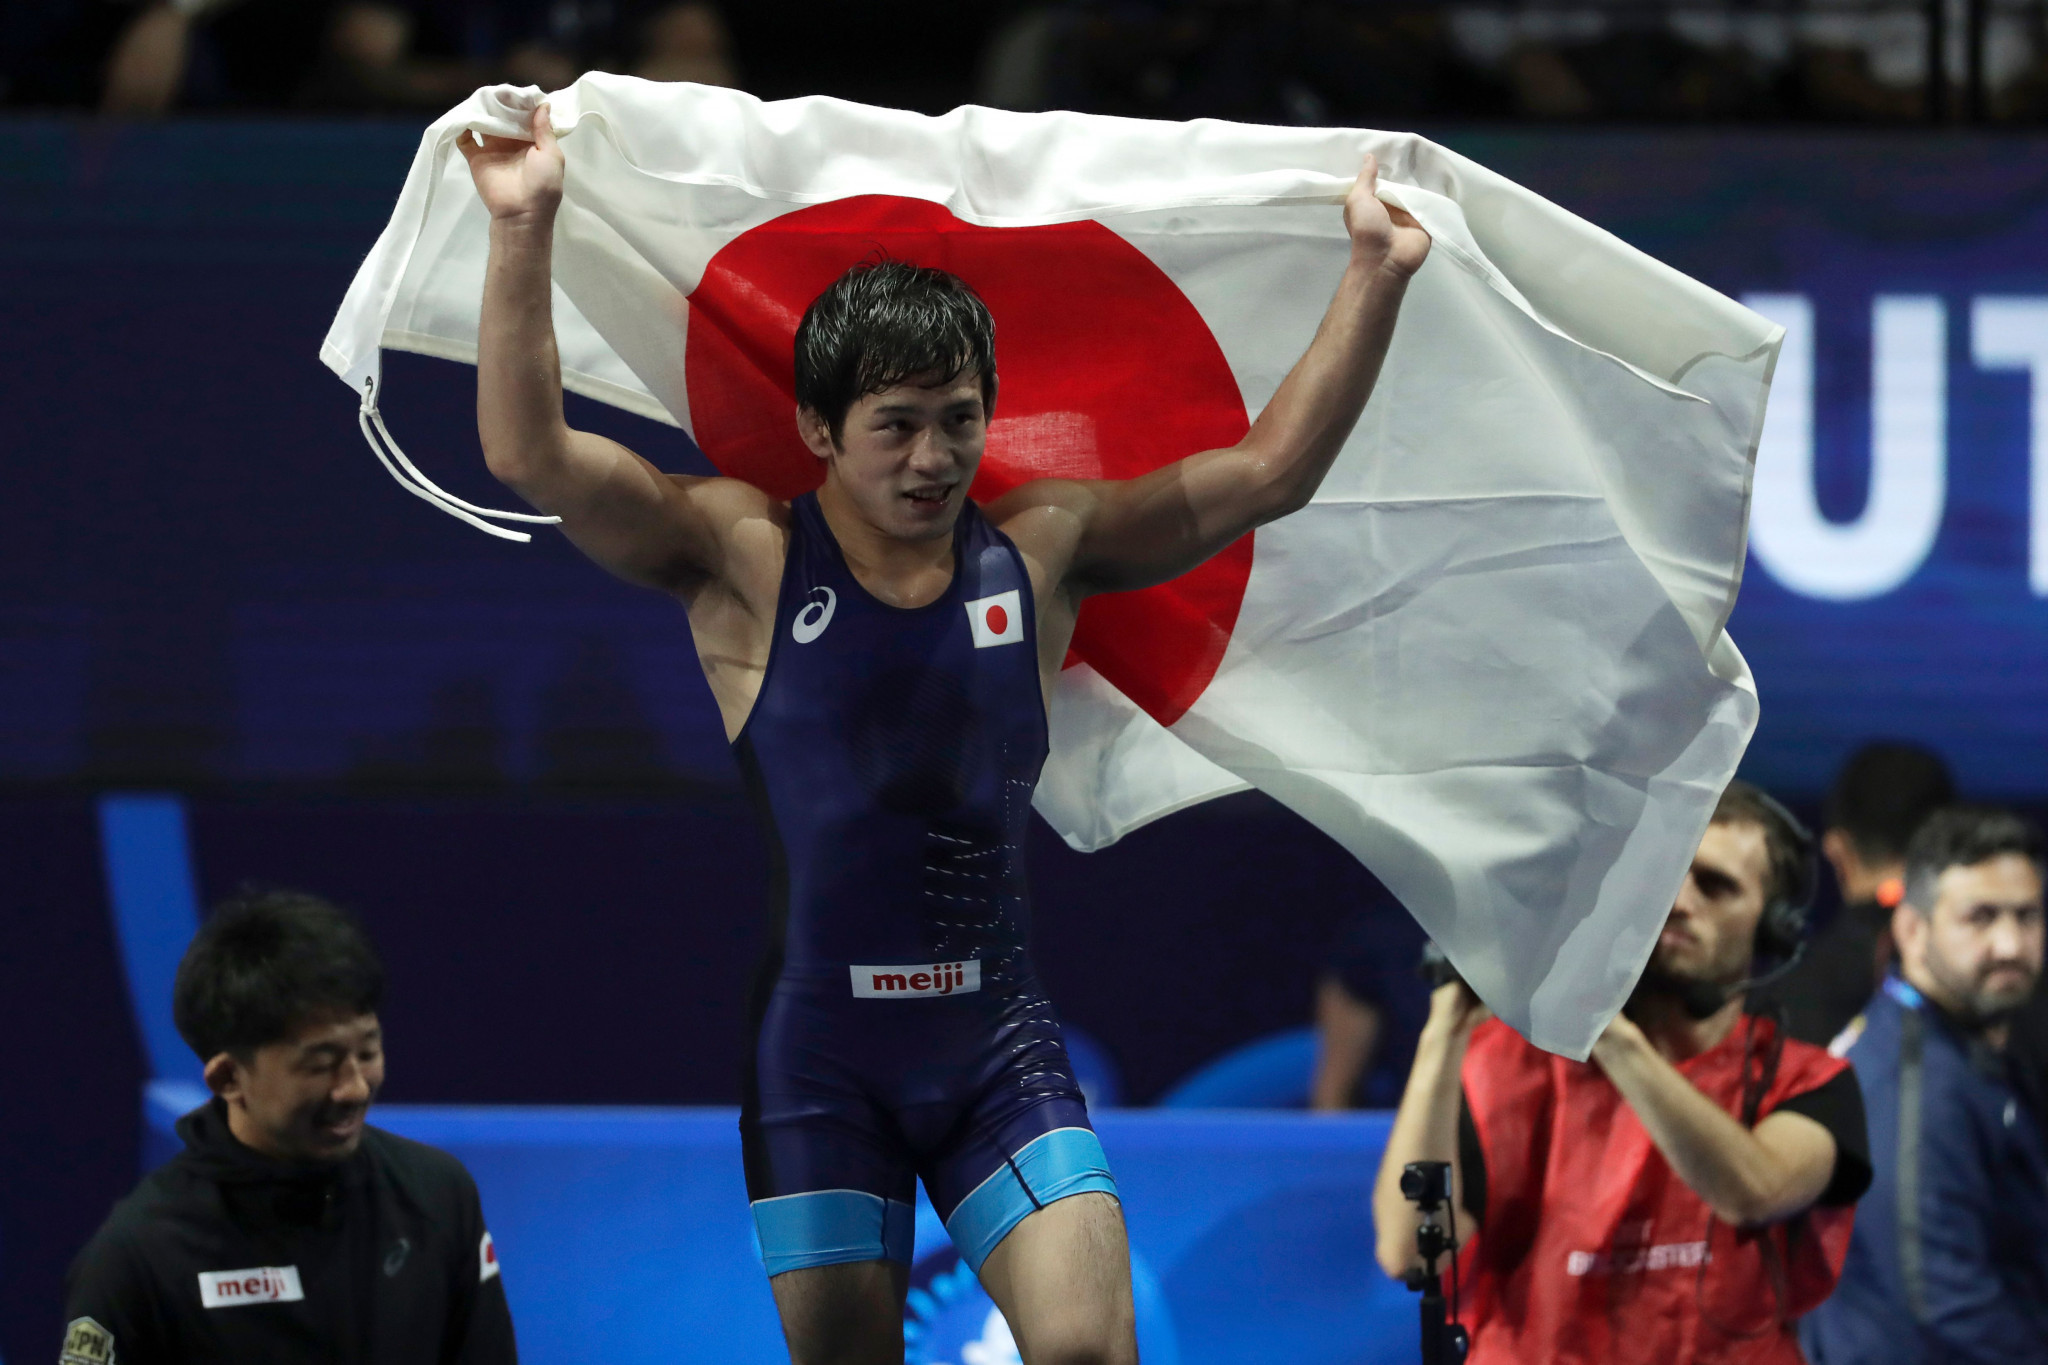 Yuki Takahashi will face a re-match of his World Championship gold medal bout in Iowa City ©Getty Images